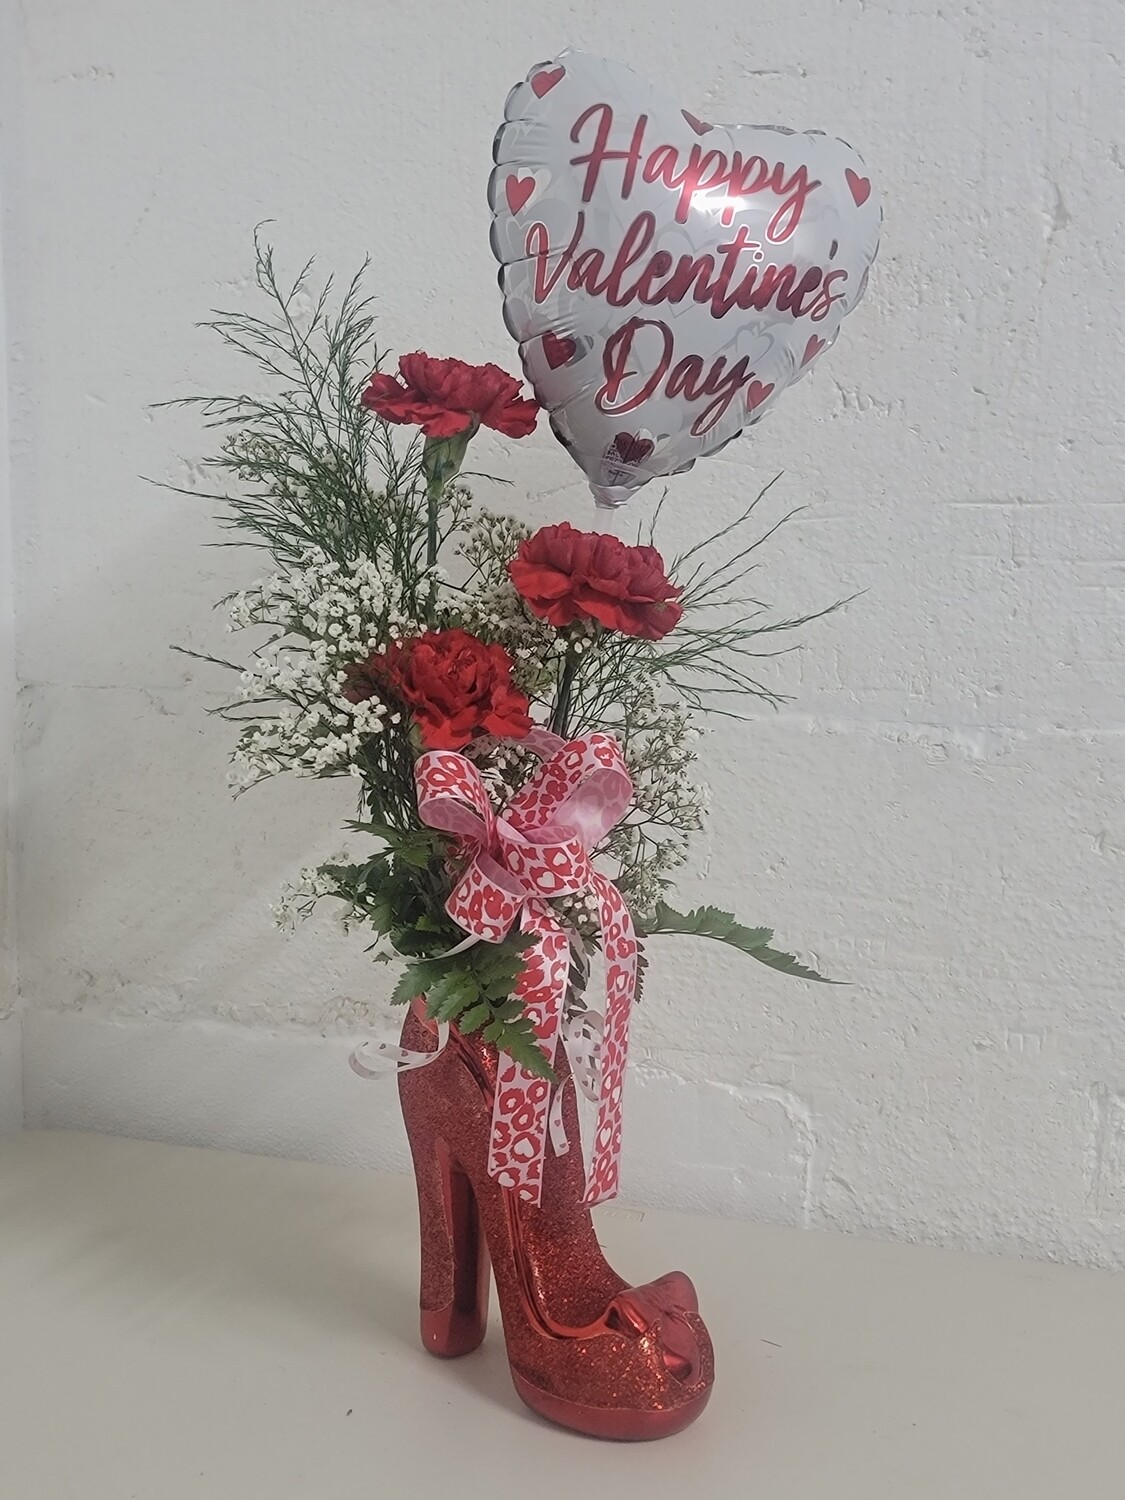 3 Carnations and a balloon in a shoe vase